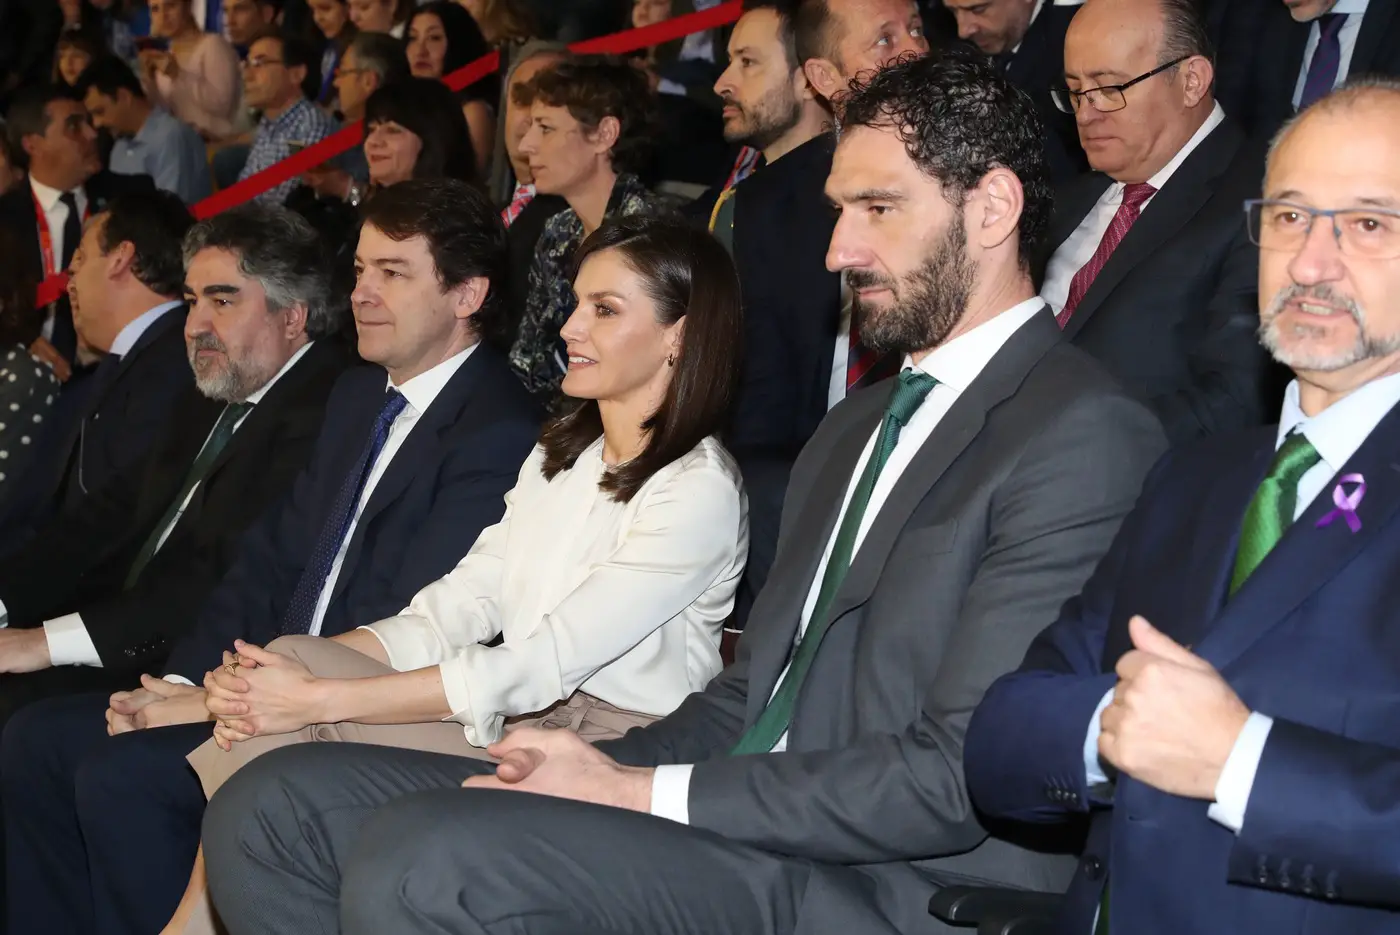 Letizia watched the match from the royal box of the stadium.